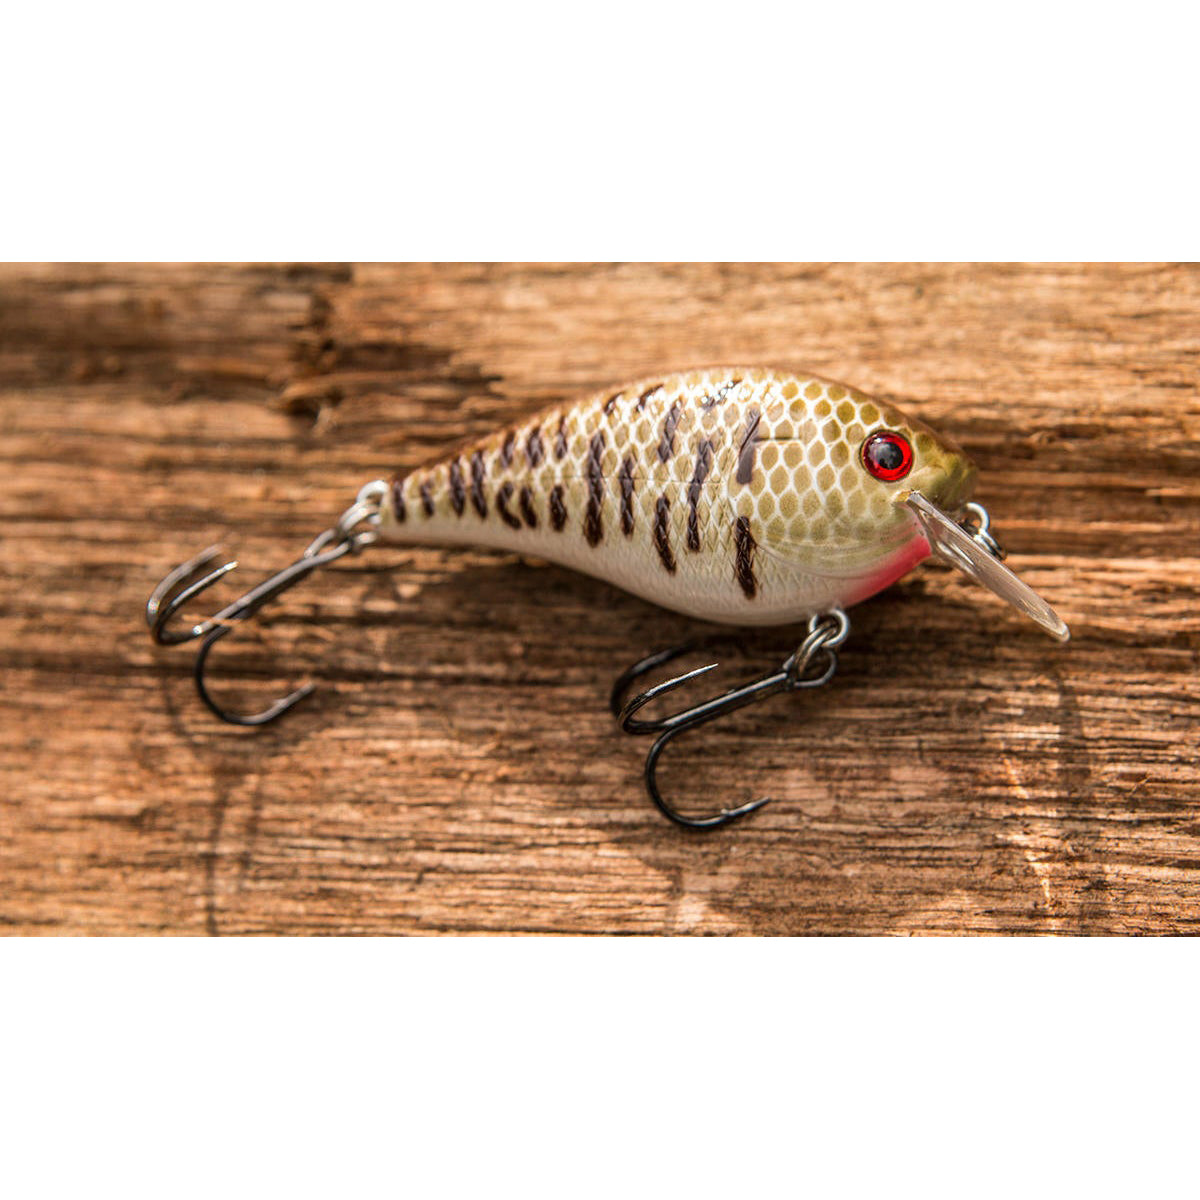  Bomber Lures Fat Free Shad Crankbait Bass Fishing Lure,  Tennesee Shad, Guppy (2 3/8 in, 3/8 oz, 4-6' Depth) (BD5MDTS) : Fishing  Topwater Lures And Crankbaits : Sports & Outdoors